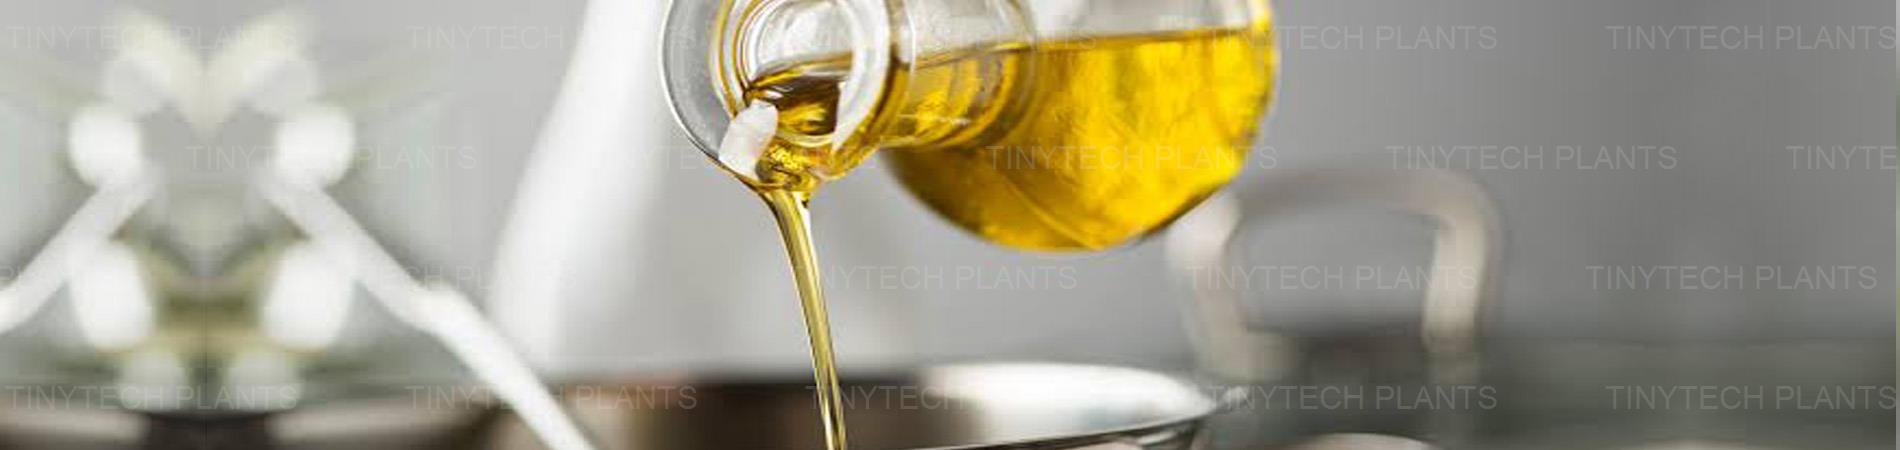 Edible Oil Extraction Plant, Tinytech Oil Mills, Tinytech Plants ...